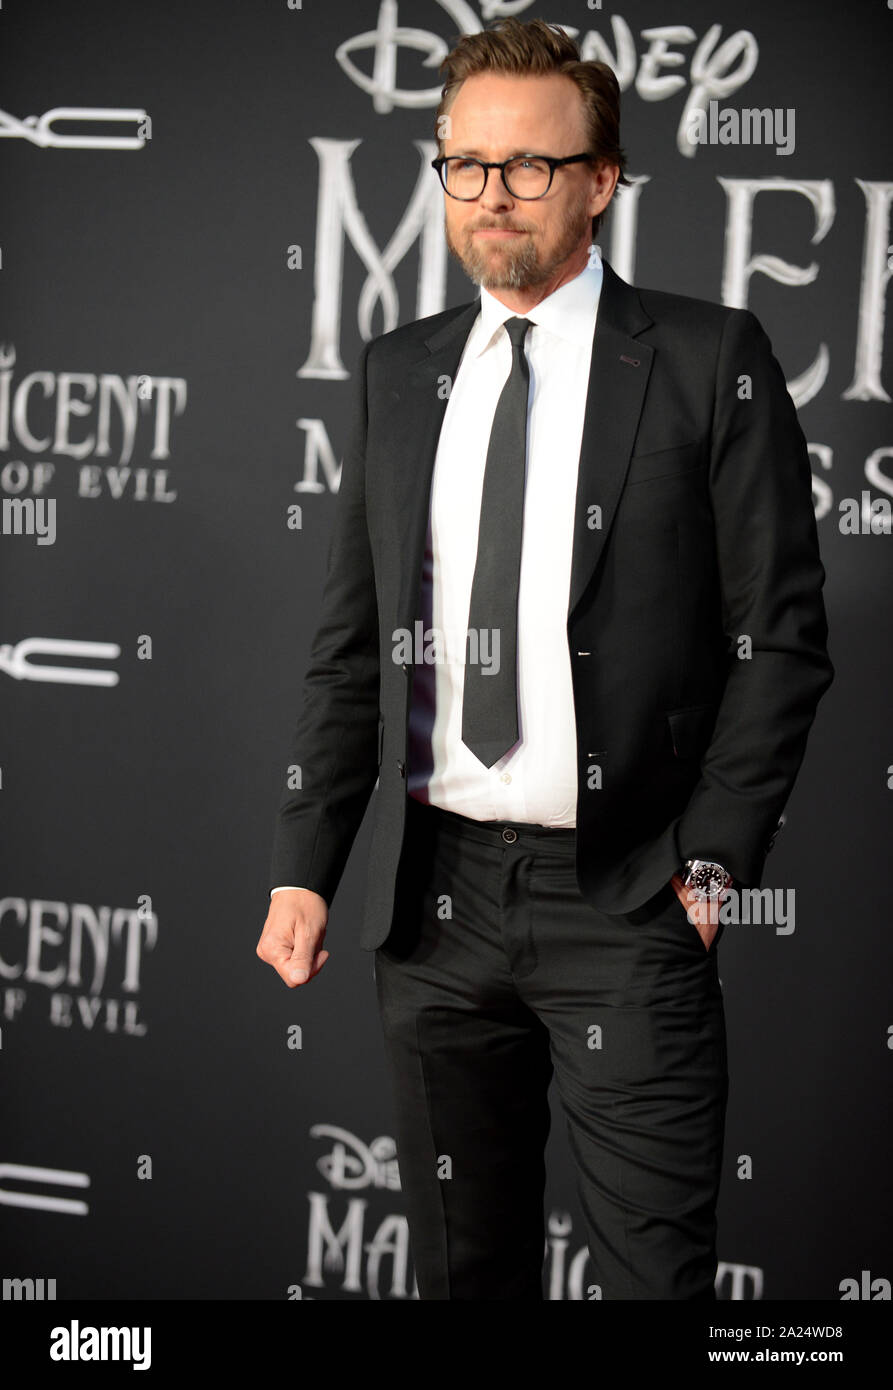 Los Angeles, USA. 30th Sep, 2019. Los Angeles, USA. 30th Sep, 2019. Joachim Ronning at the world premiere of 'Maleficent: Mistress of Evil' at the El Capitan Theatre. Picture: Jessica Sherman/Featureflash Credit: Paul Smith/Alamy Live News Stock Photo